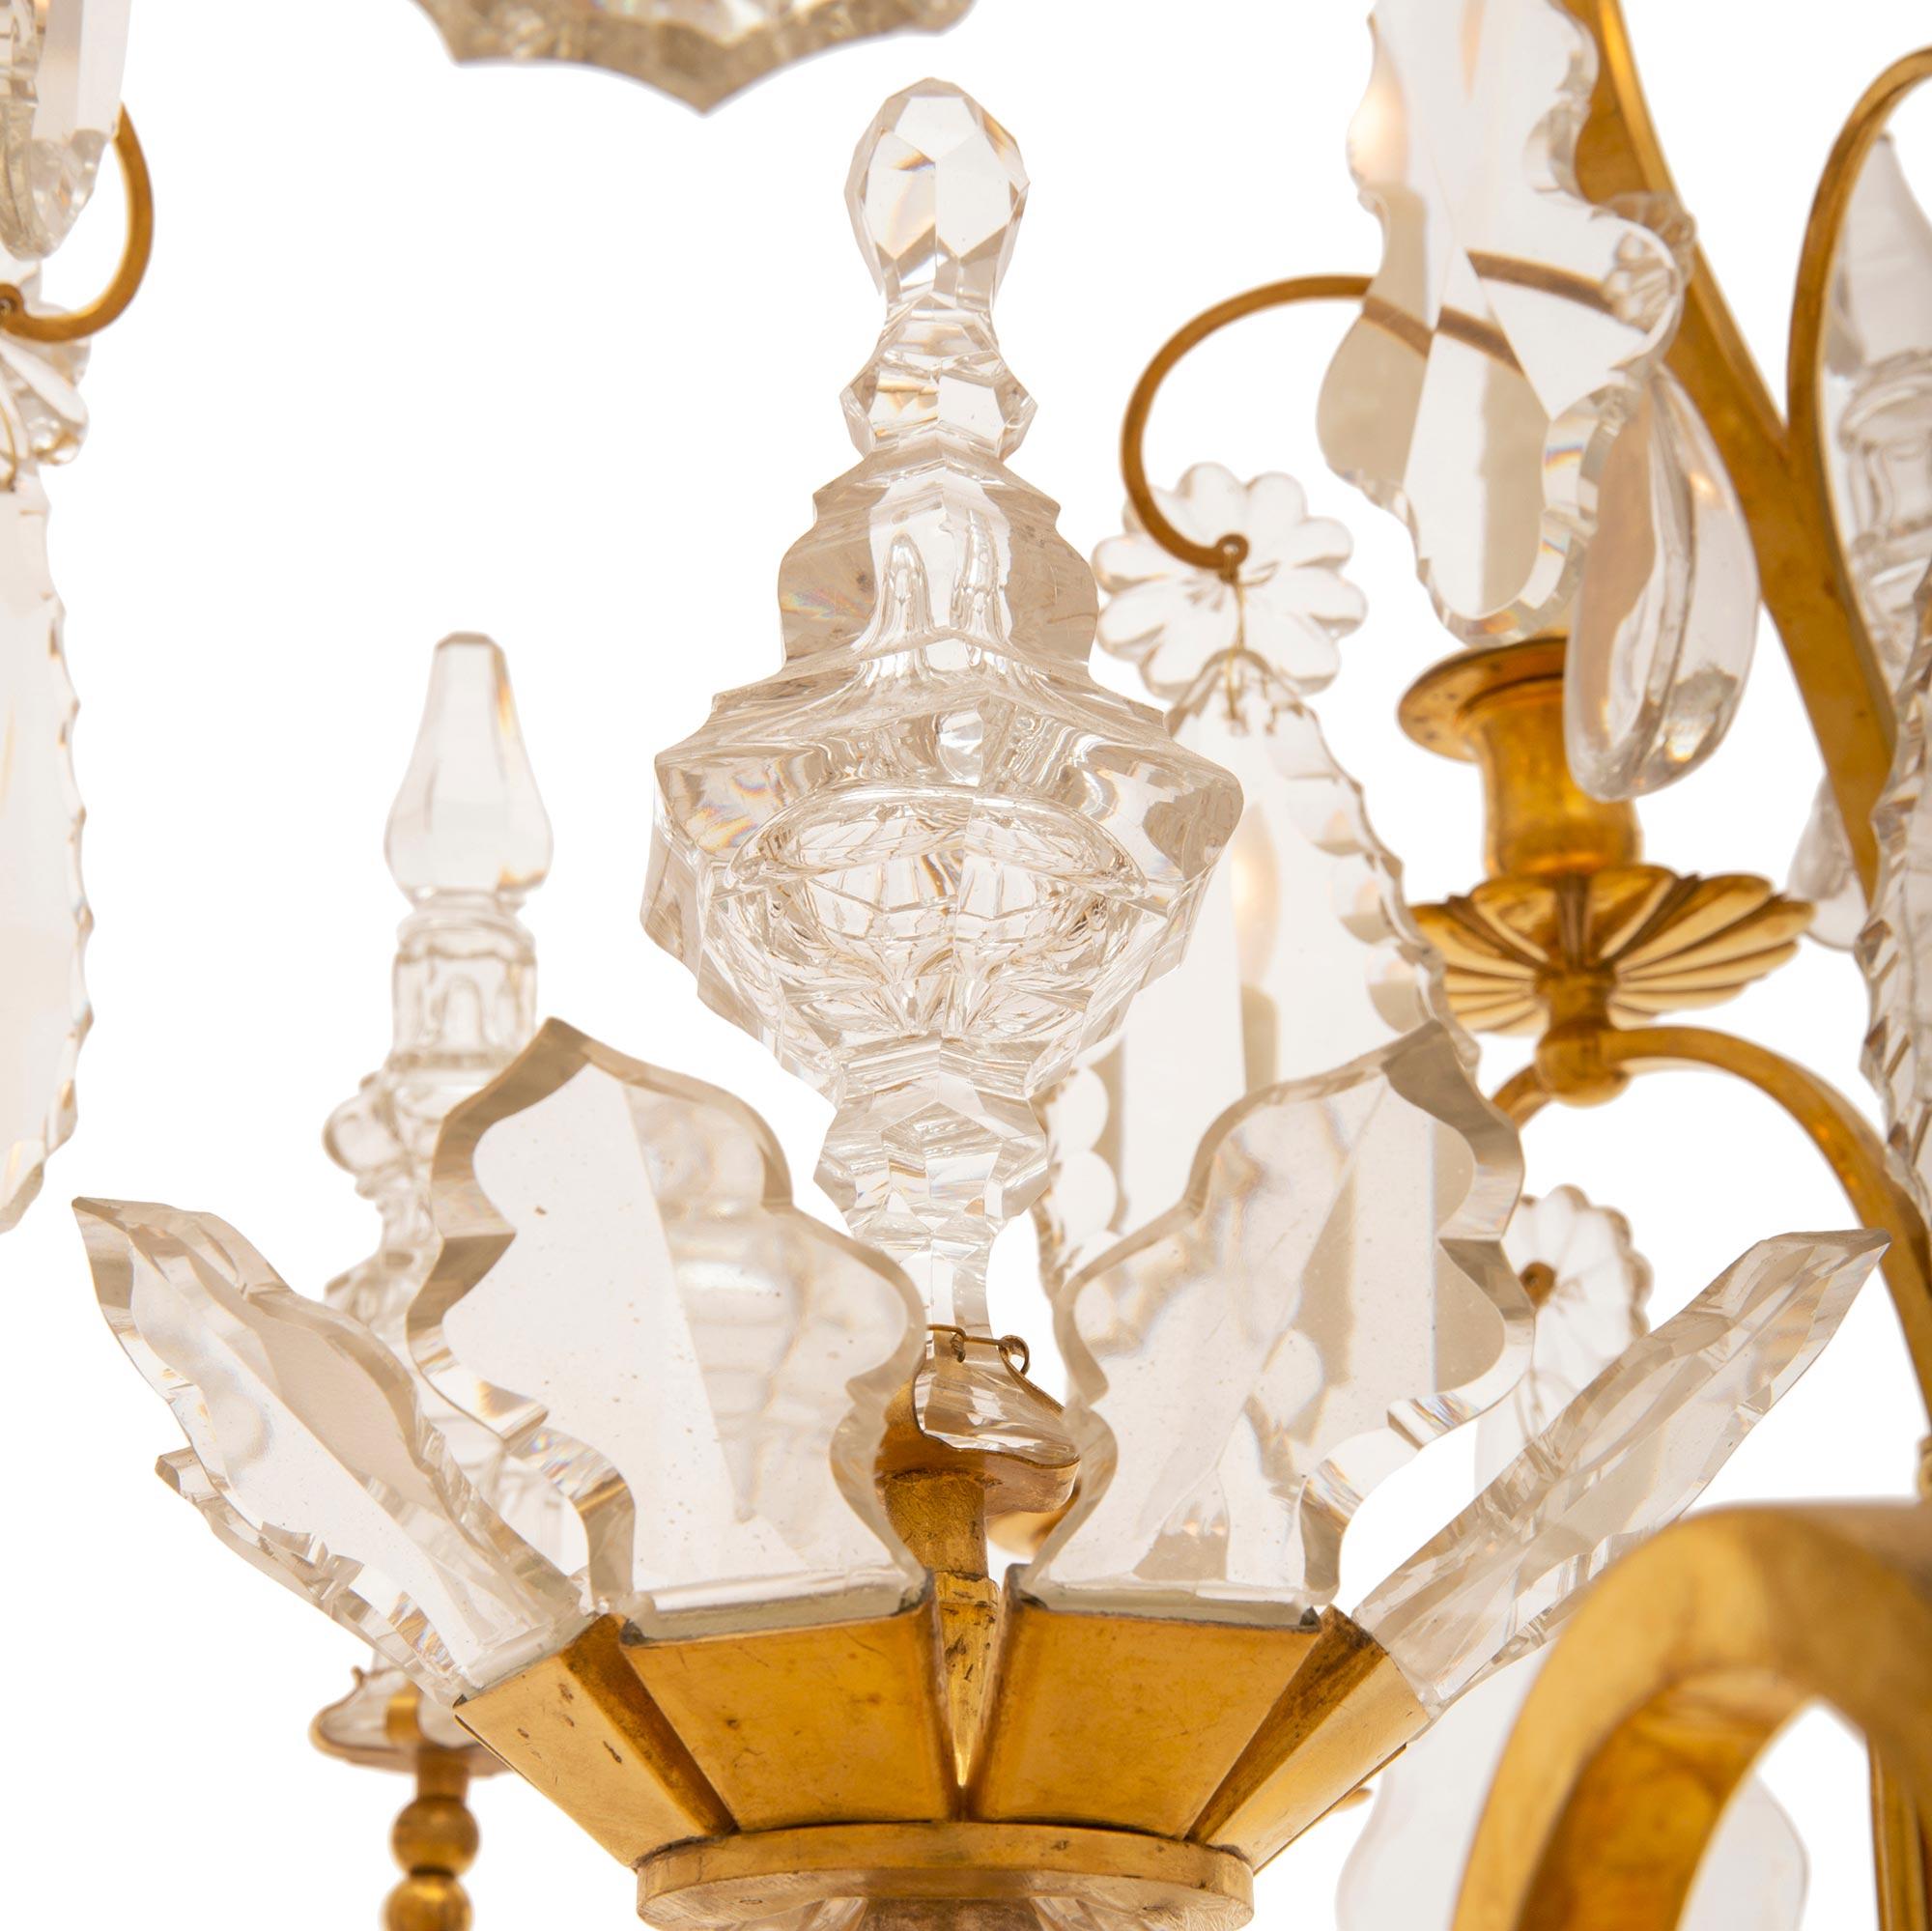 French 19th Century Louis XV Style 12-Light Baccarat Crystal Chandelier For Sale 1